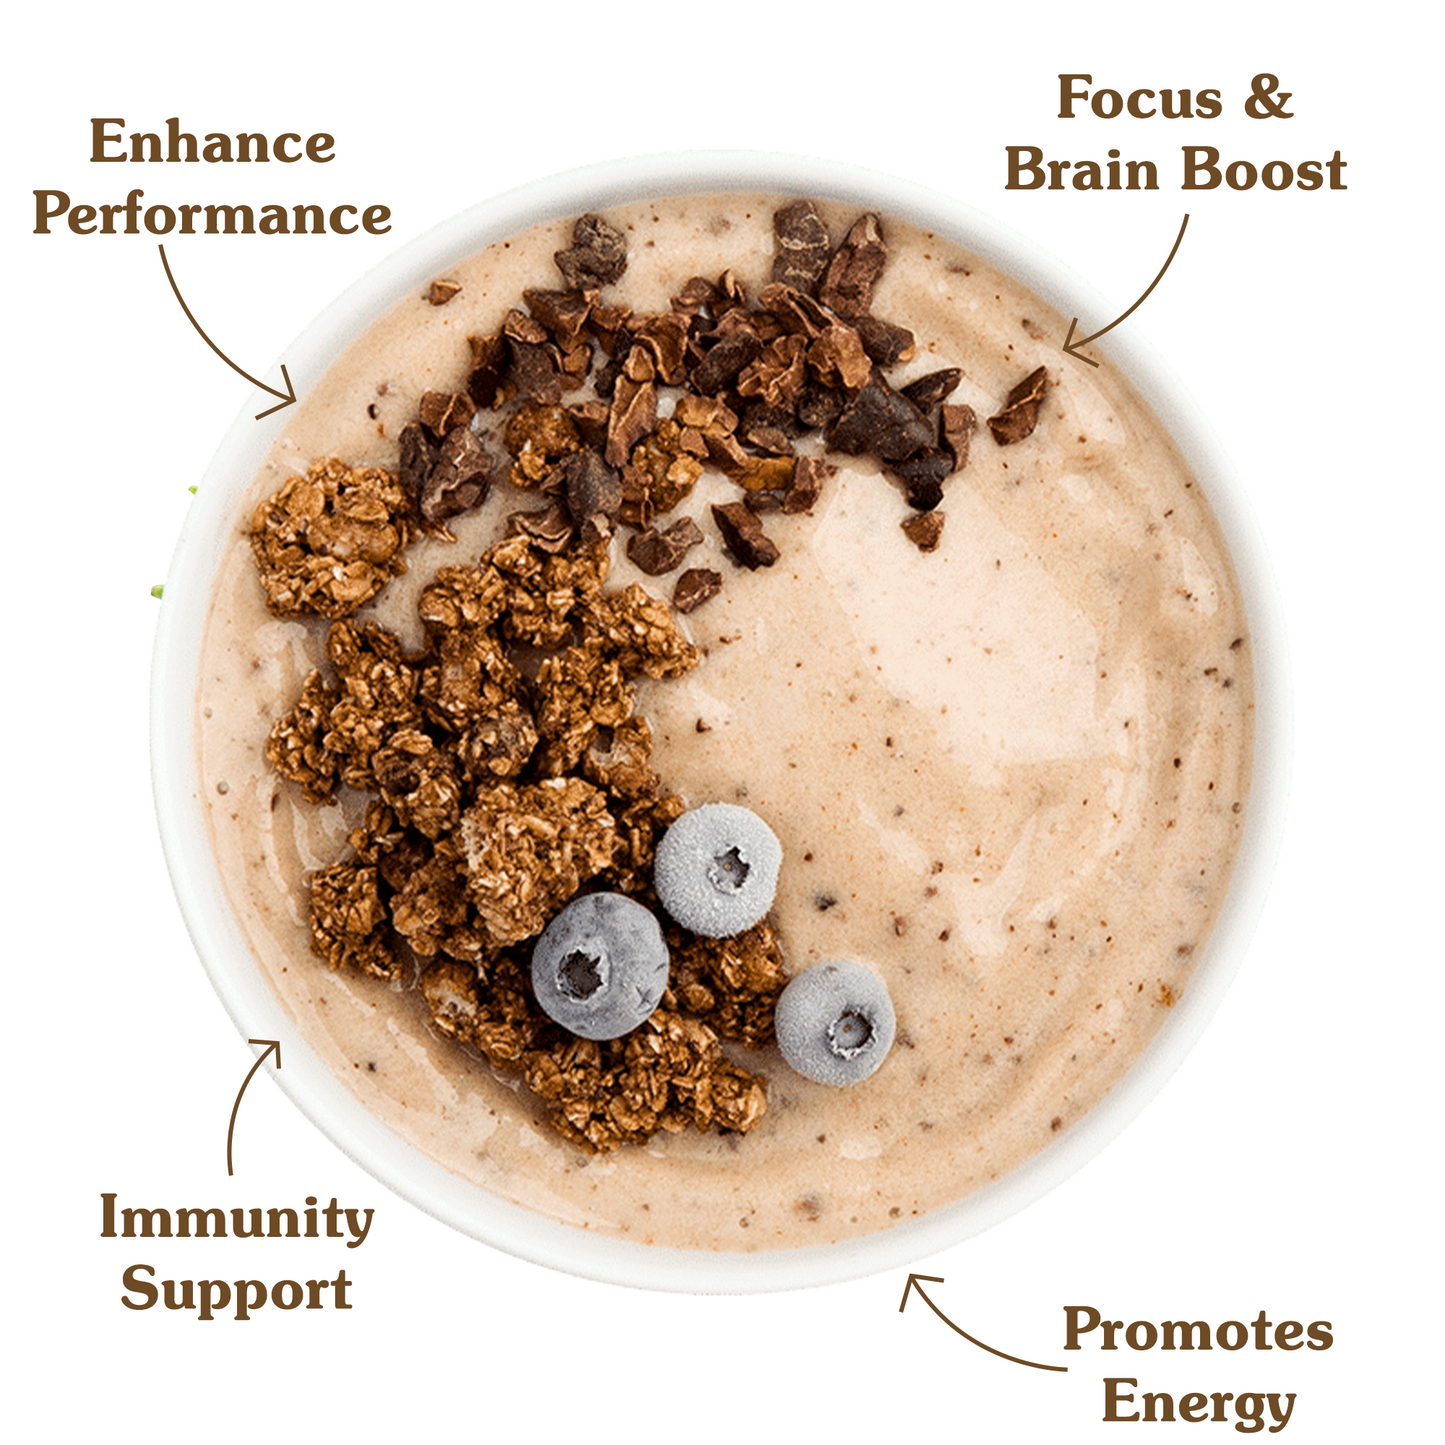 Forest Performance Protein. |Collagen, Whey & Superfoods.|